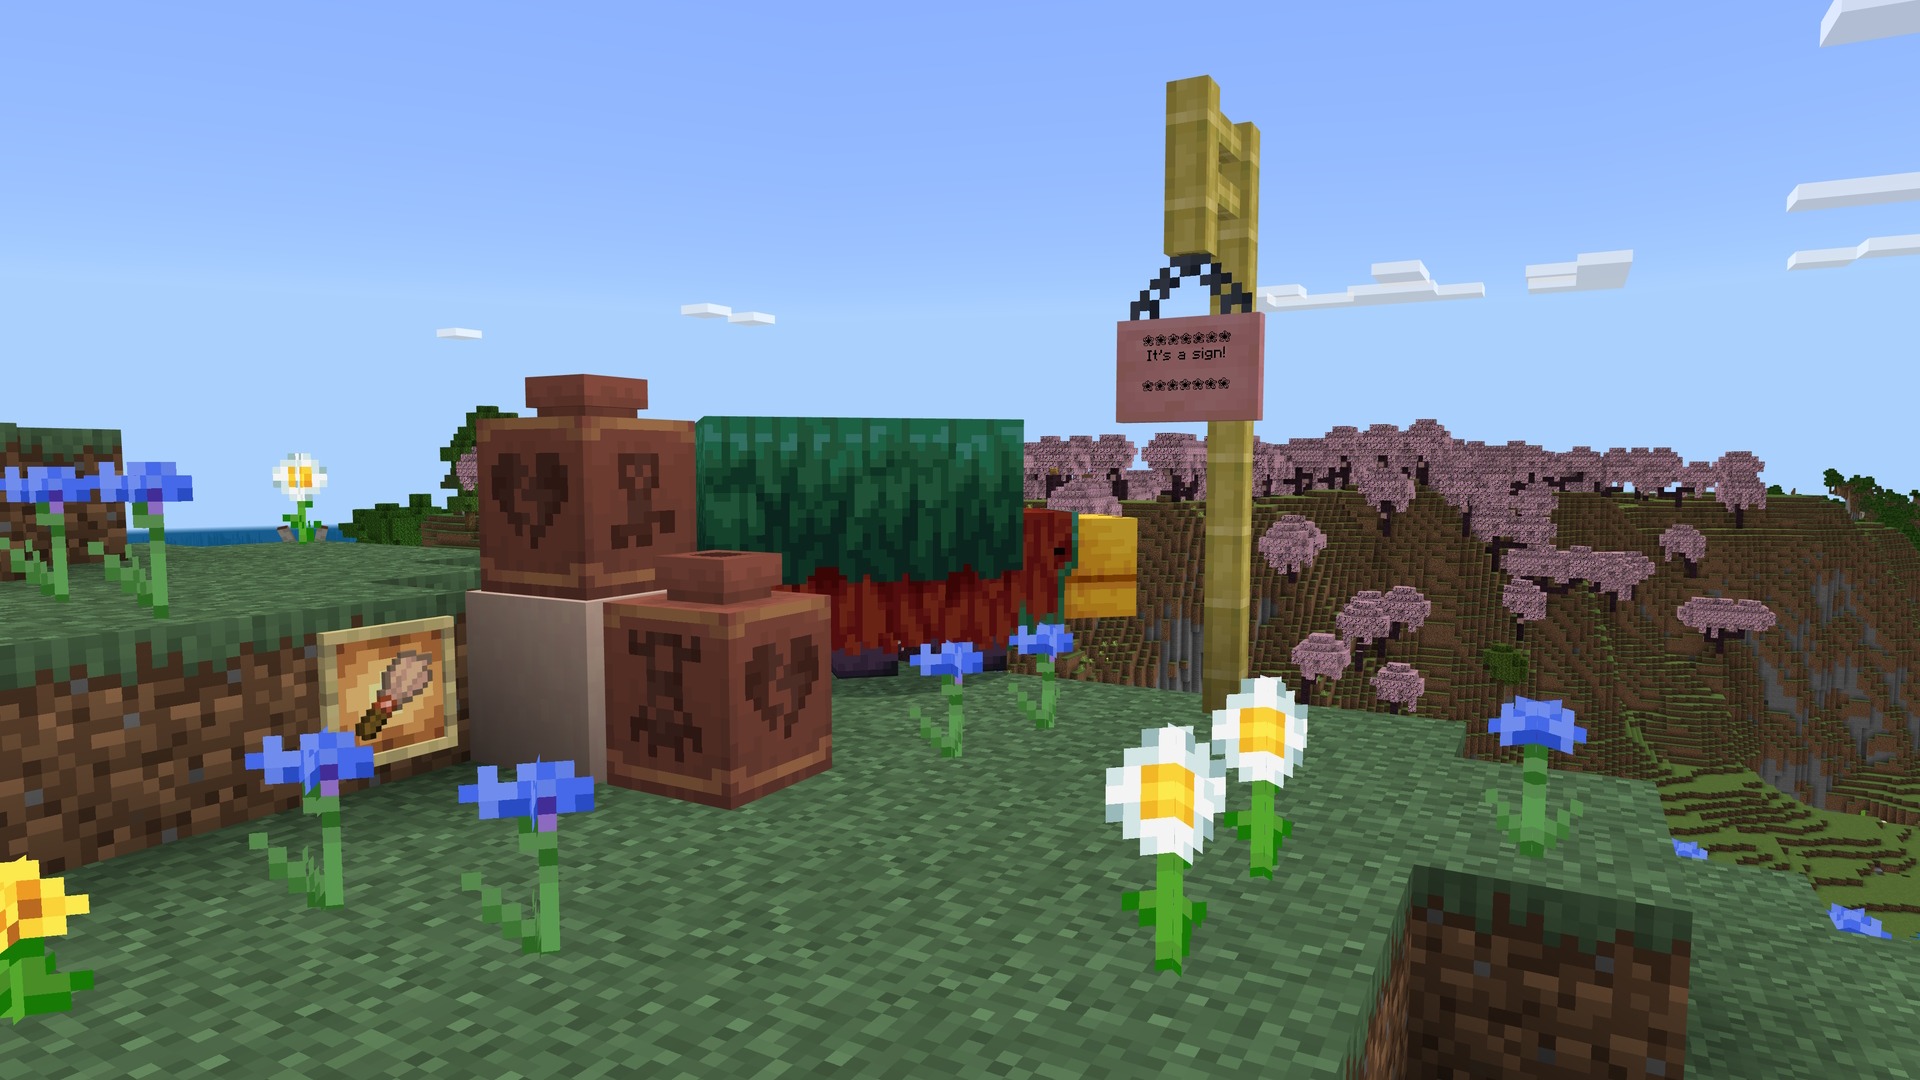 A Minecraft screenshot featuring a hanging sign, decorated pots, a sniffer mob, and cherry trees in the background.